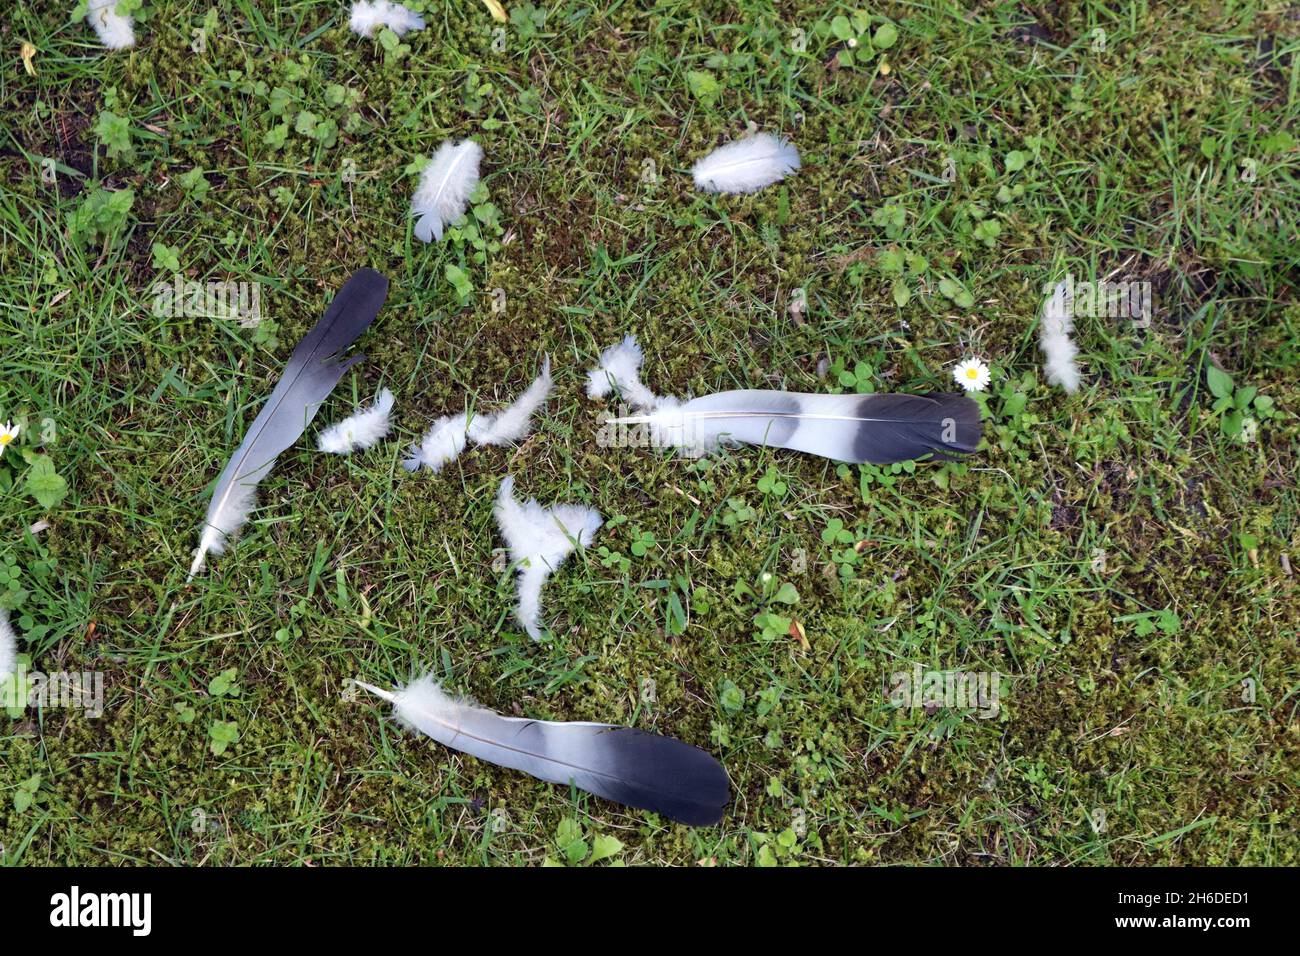 domestic pigeon, feral pigeon (Columba livia f. domestica), plucking with feathers of a domestic pigeon, Germany Stock Photo